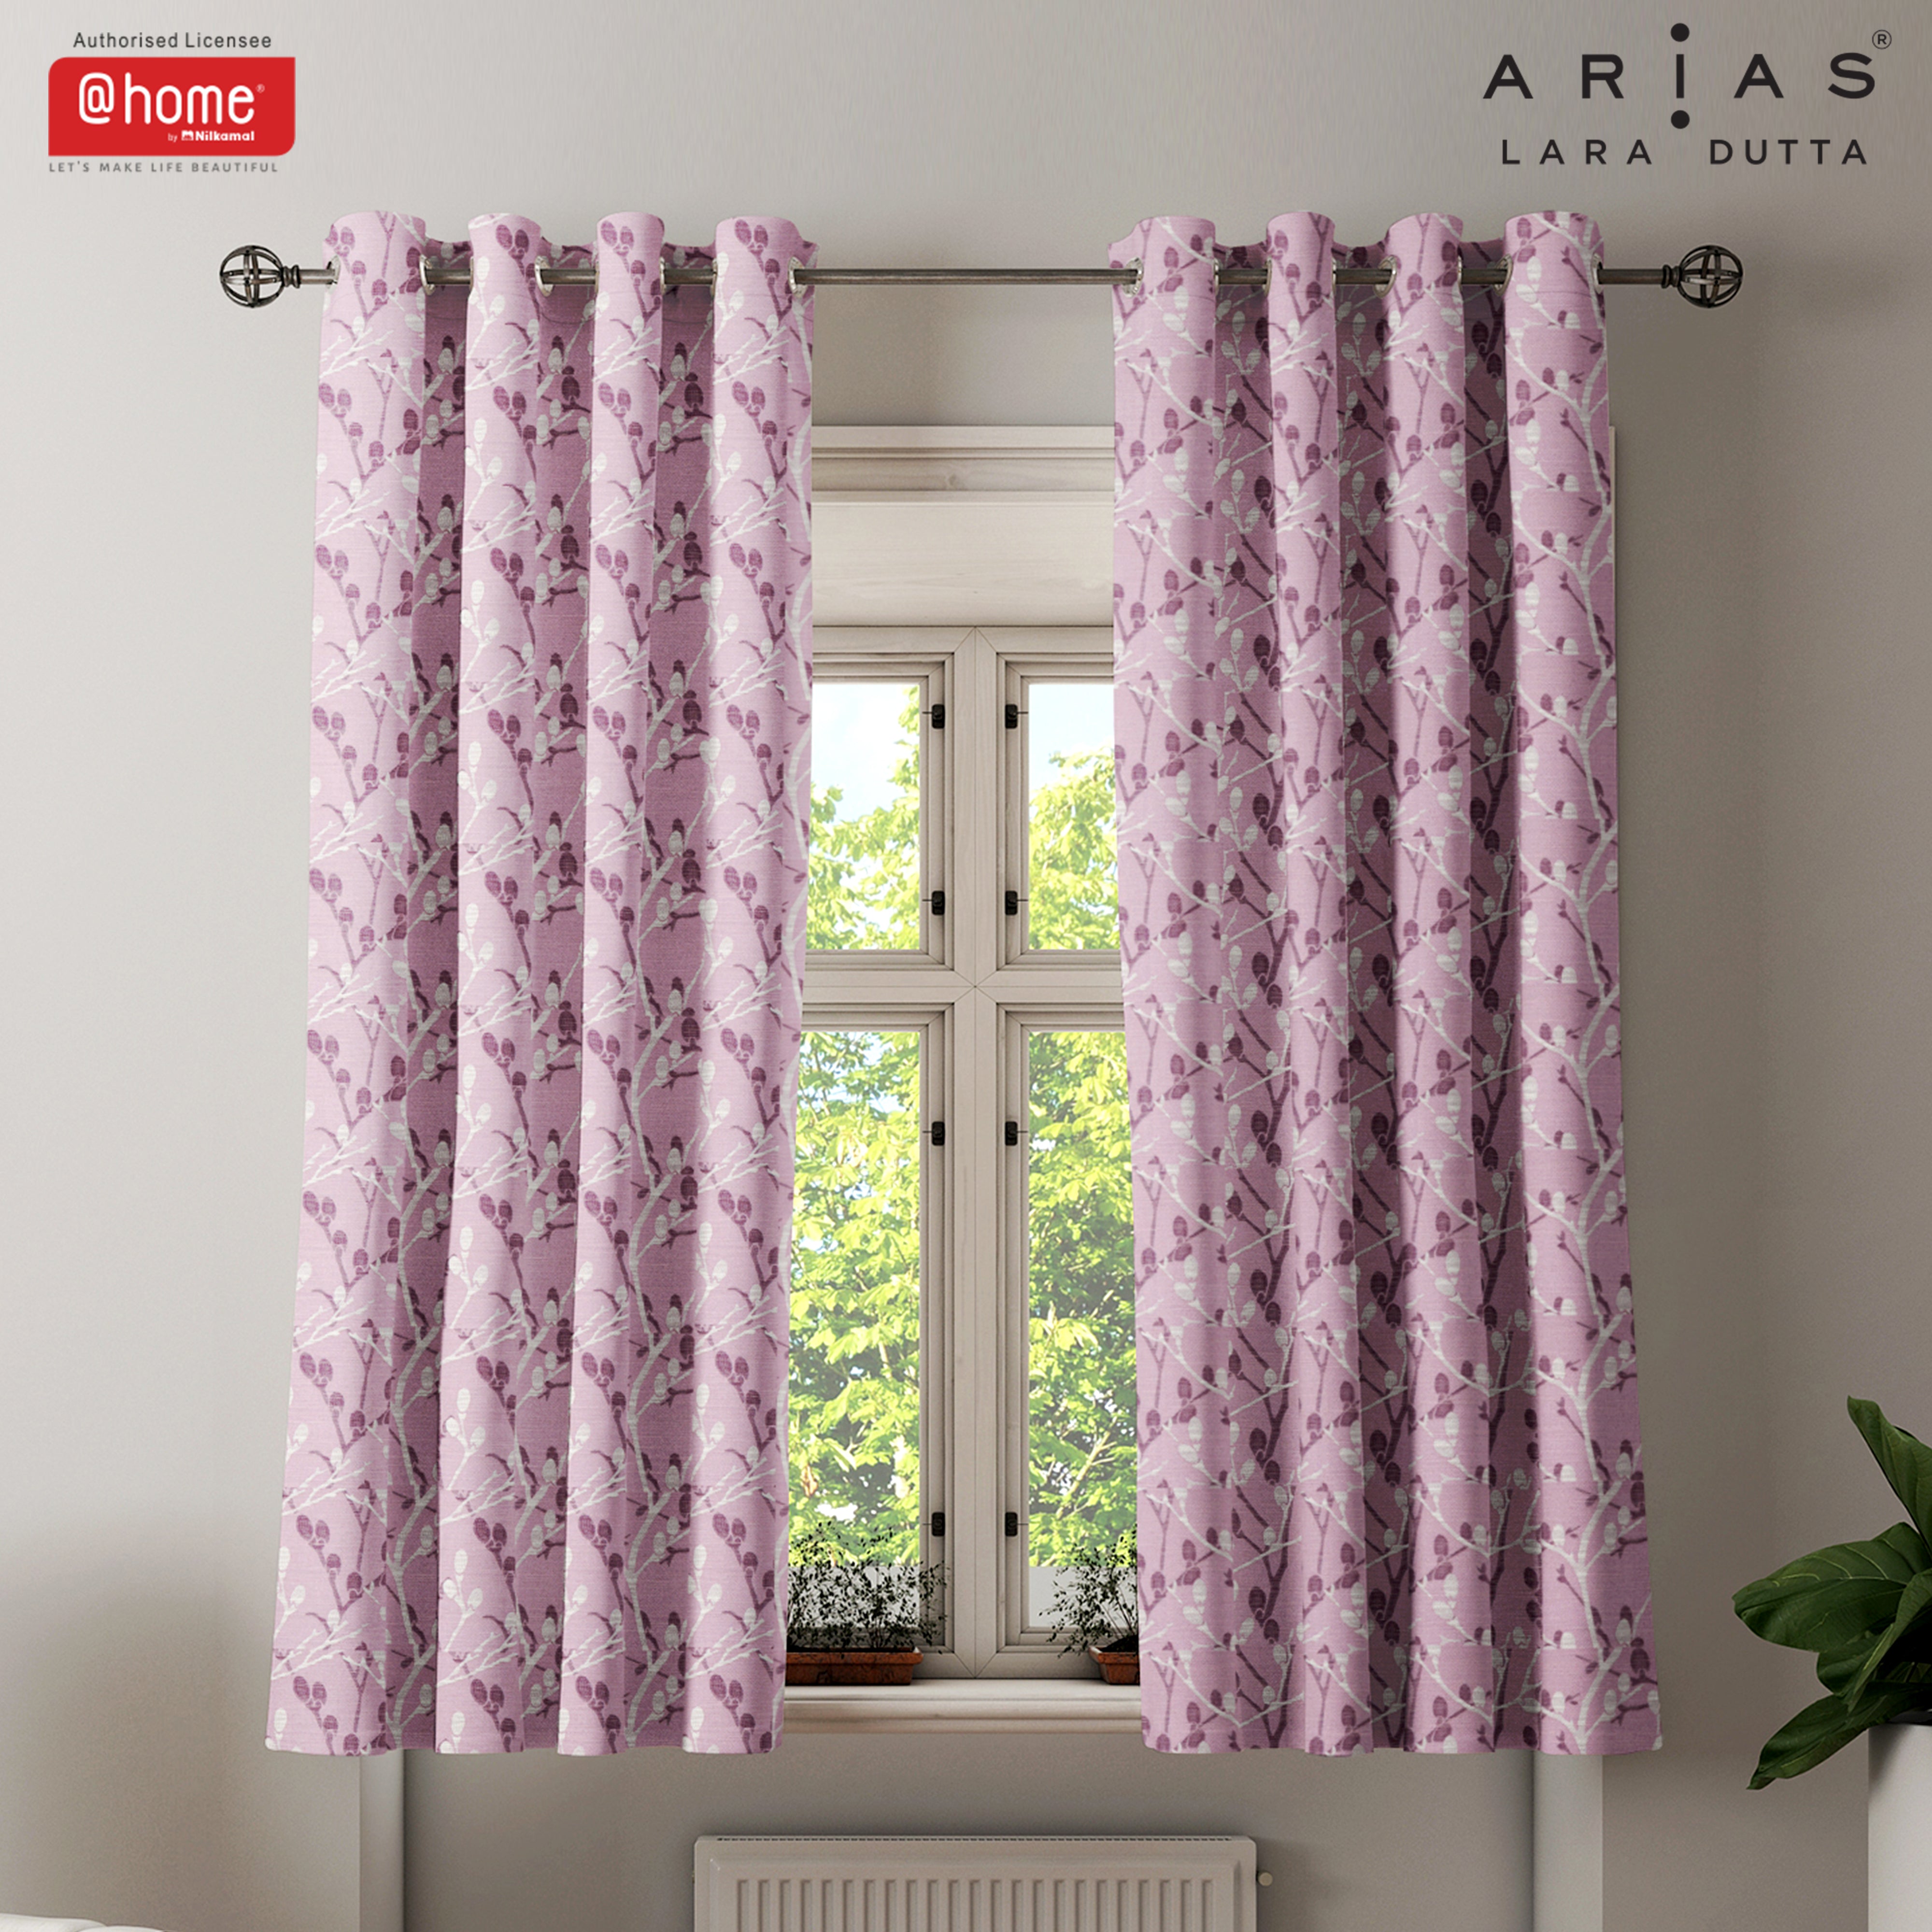 Arias Luxuria Jacquard Floral 5 Ft Polyester Window Curtain Set of 2 (Onion)